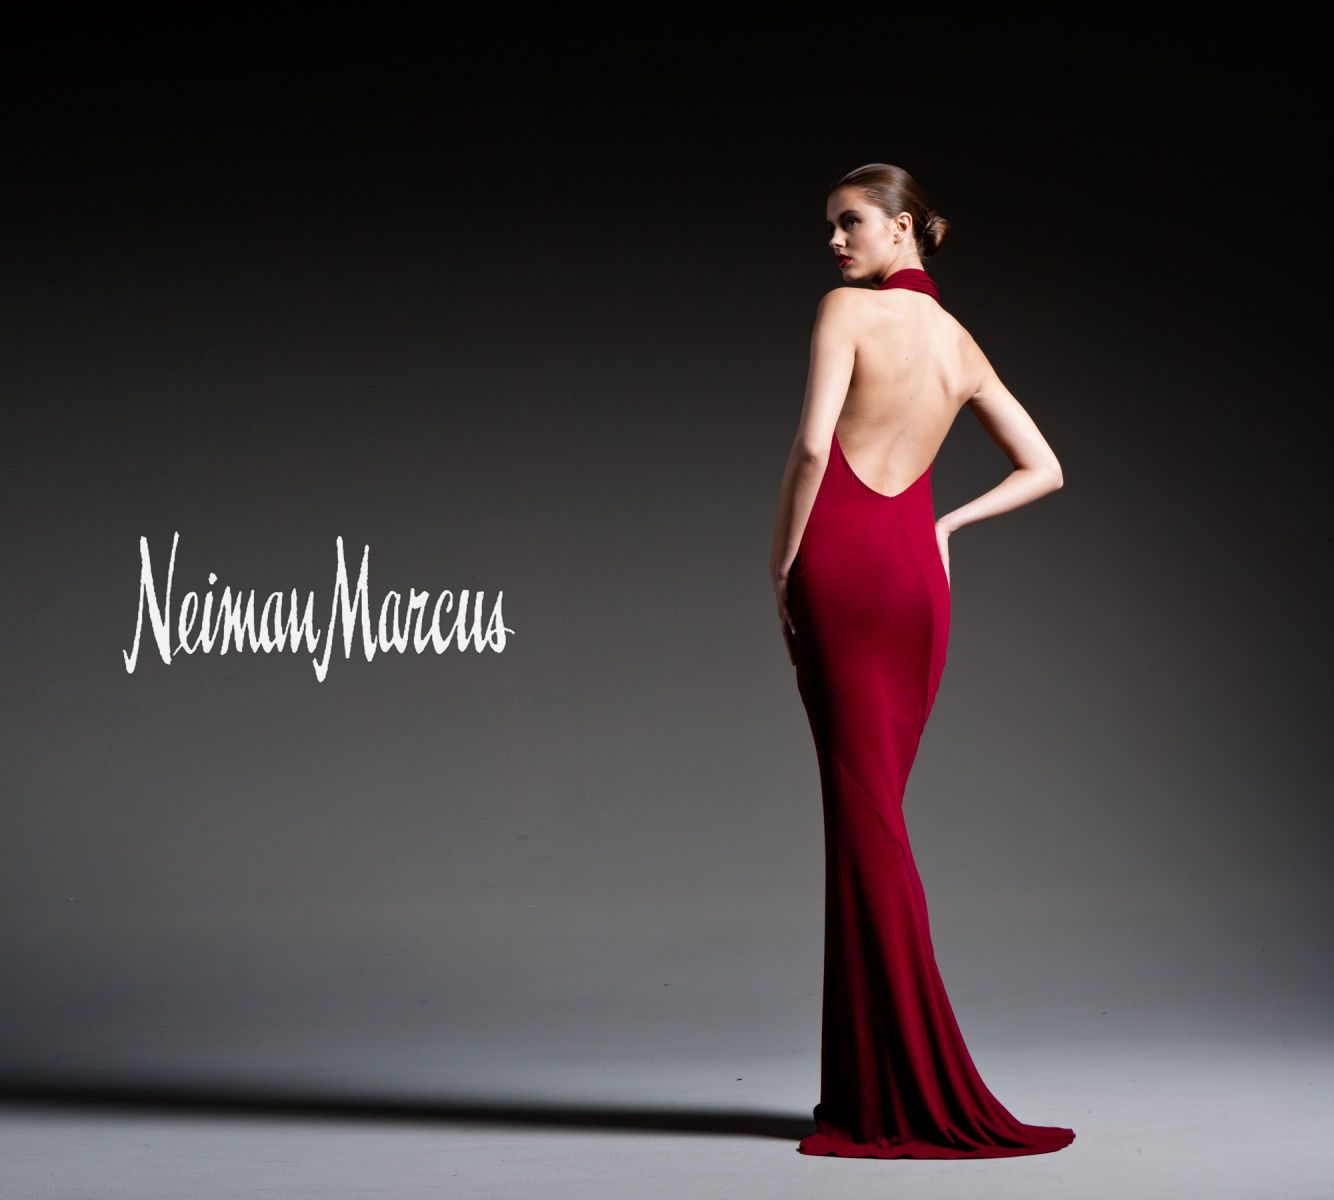 Little Red Riding Hood by Neiman Marcus